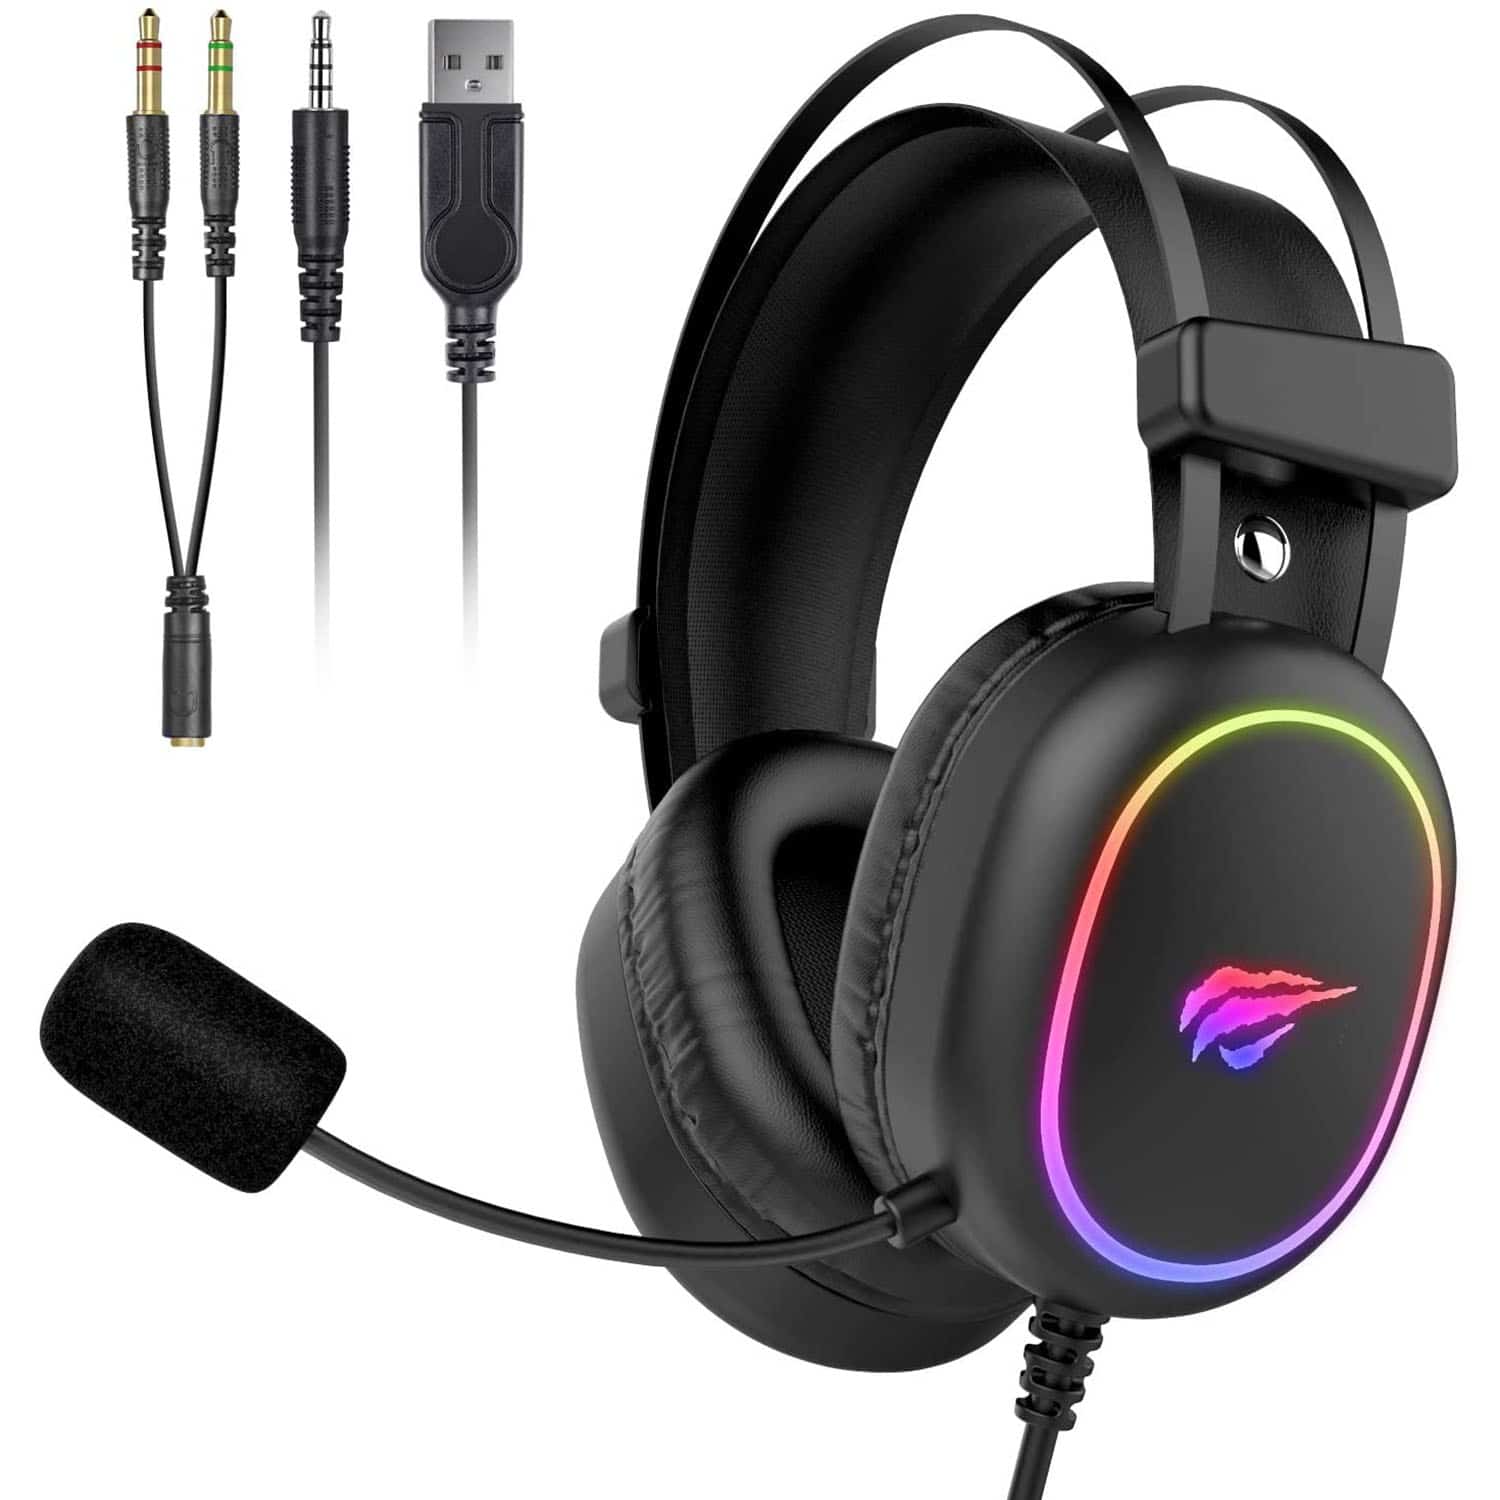 HAVIT H2016D RGB Wired Gaming Headset with Stereo Surround Sound and HD Mic